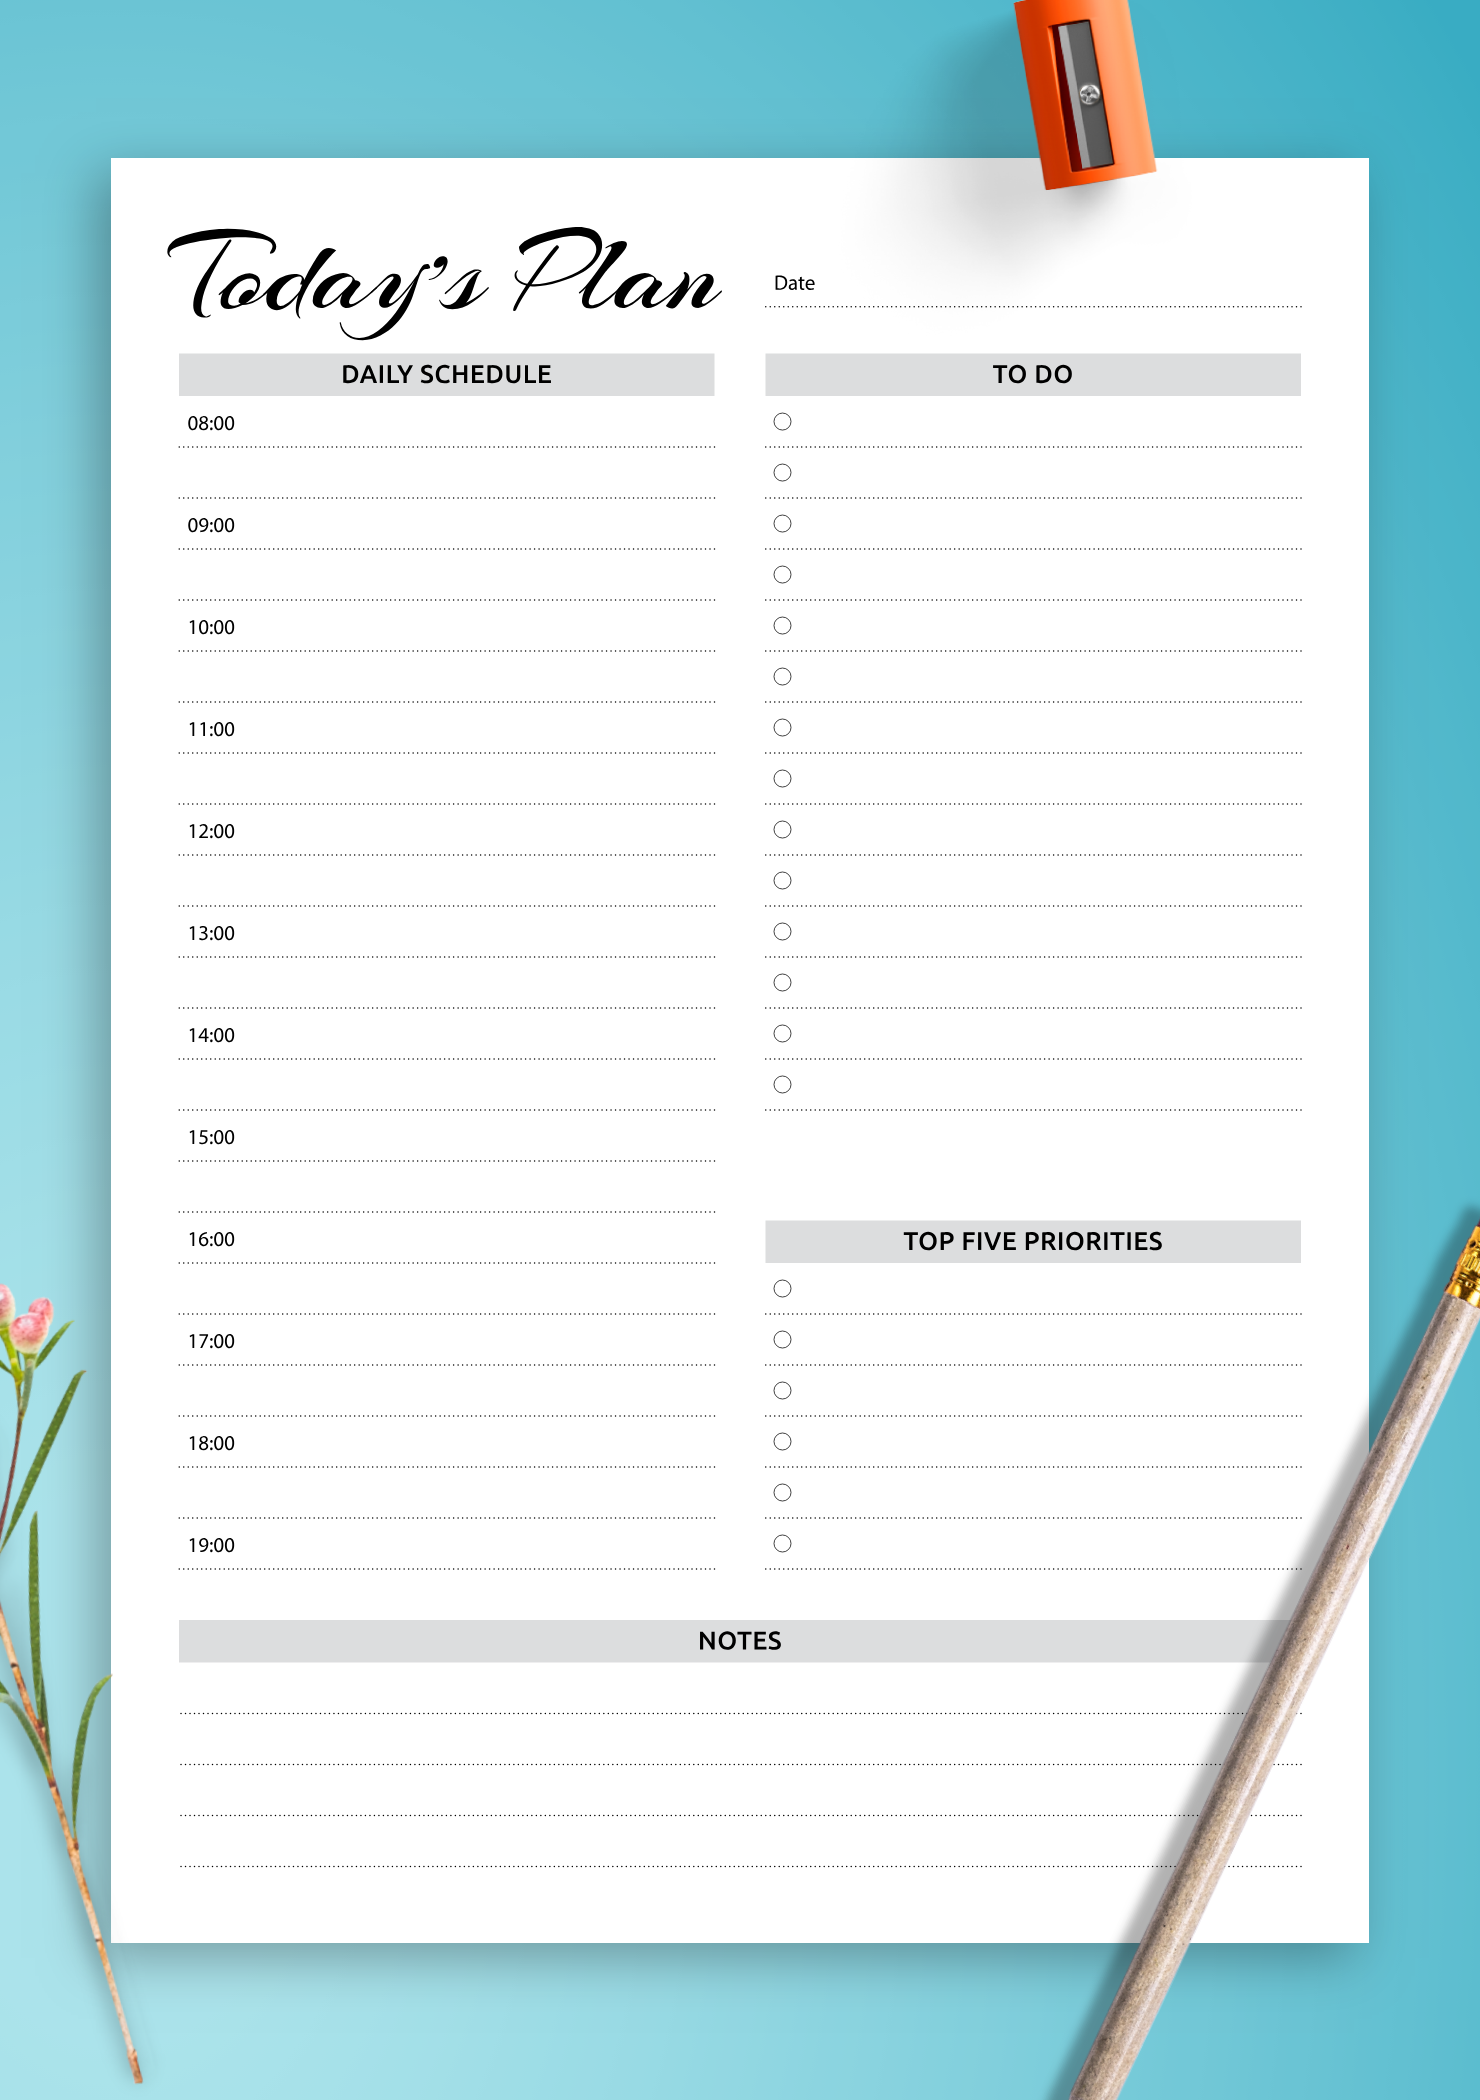 Download Printable Daily Planner With Hourly Schedule And To Do List